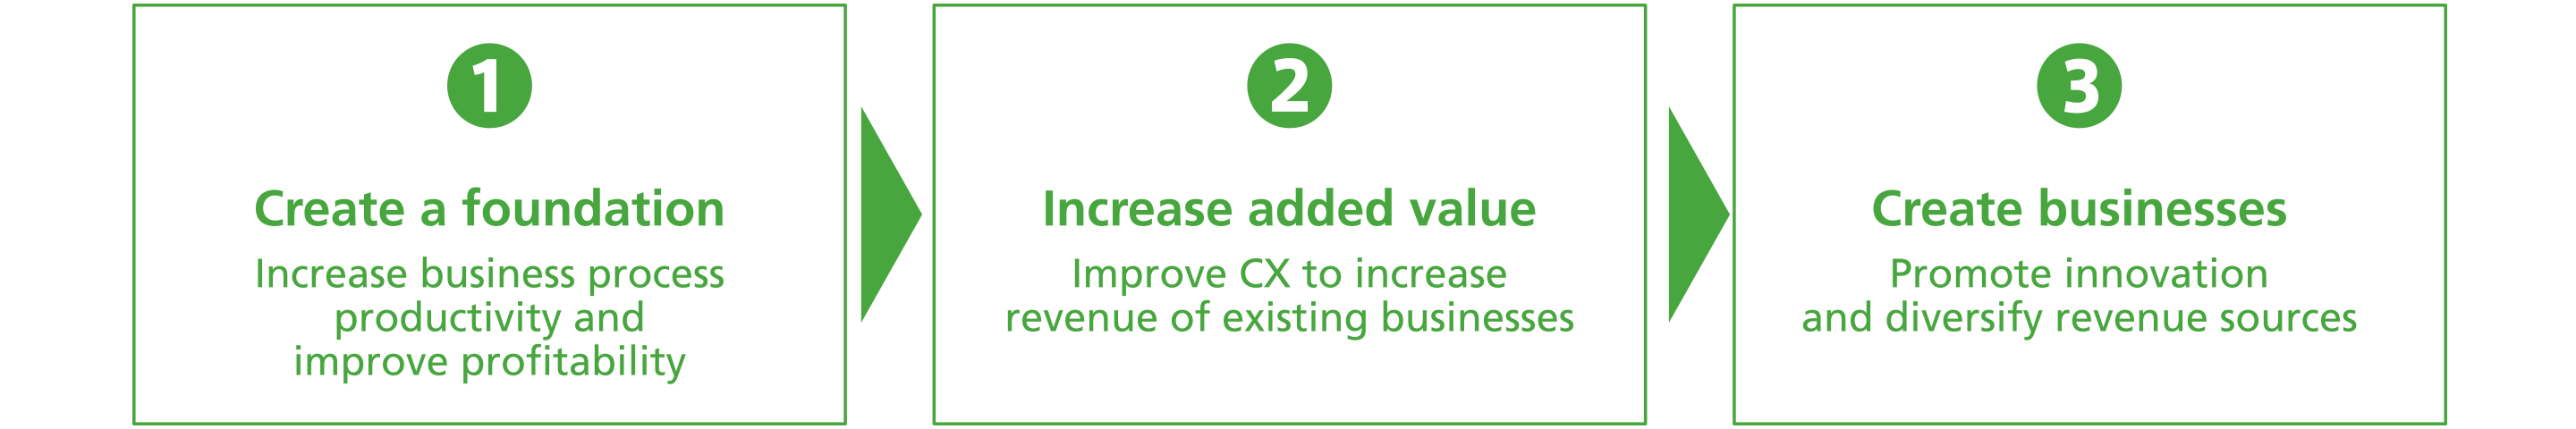 1.Create a foundation: Increase business process productivity and improve profitability 2.Increase added value: Improve CX to increase revenue of existing businesses 3.Create businesses: Promote innovation and diversify revenue sources